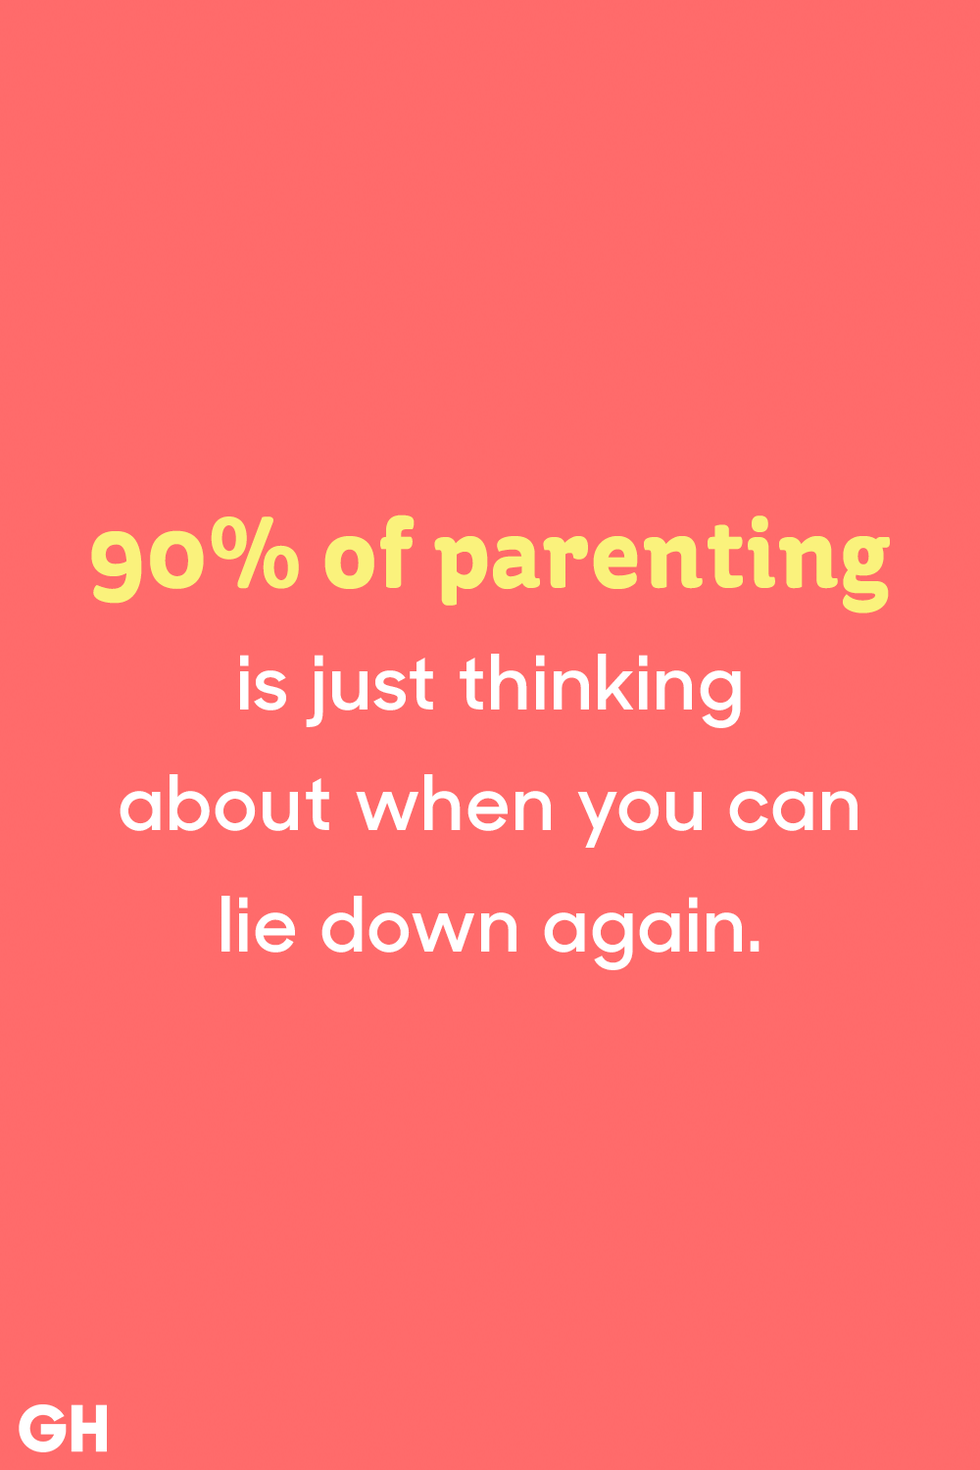 25 Funny Parenting Quotes - Hilarious Quotes About Being A Parent